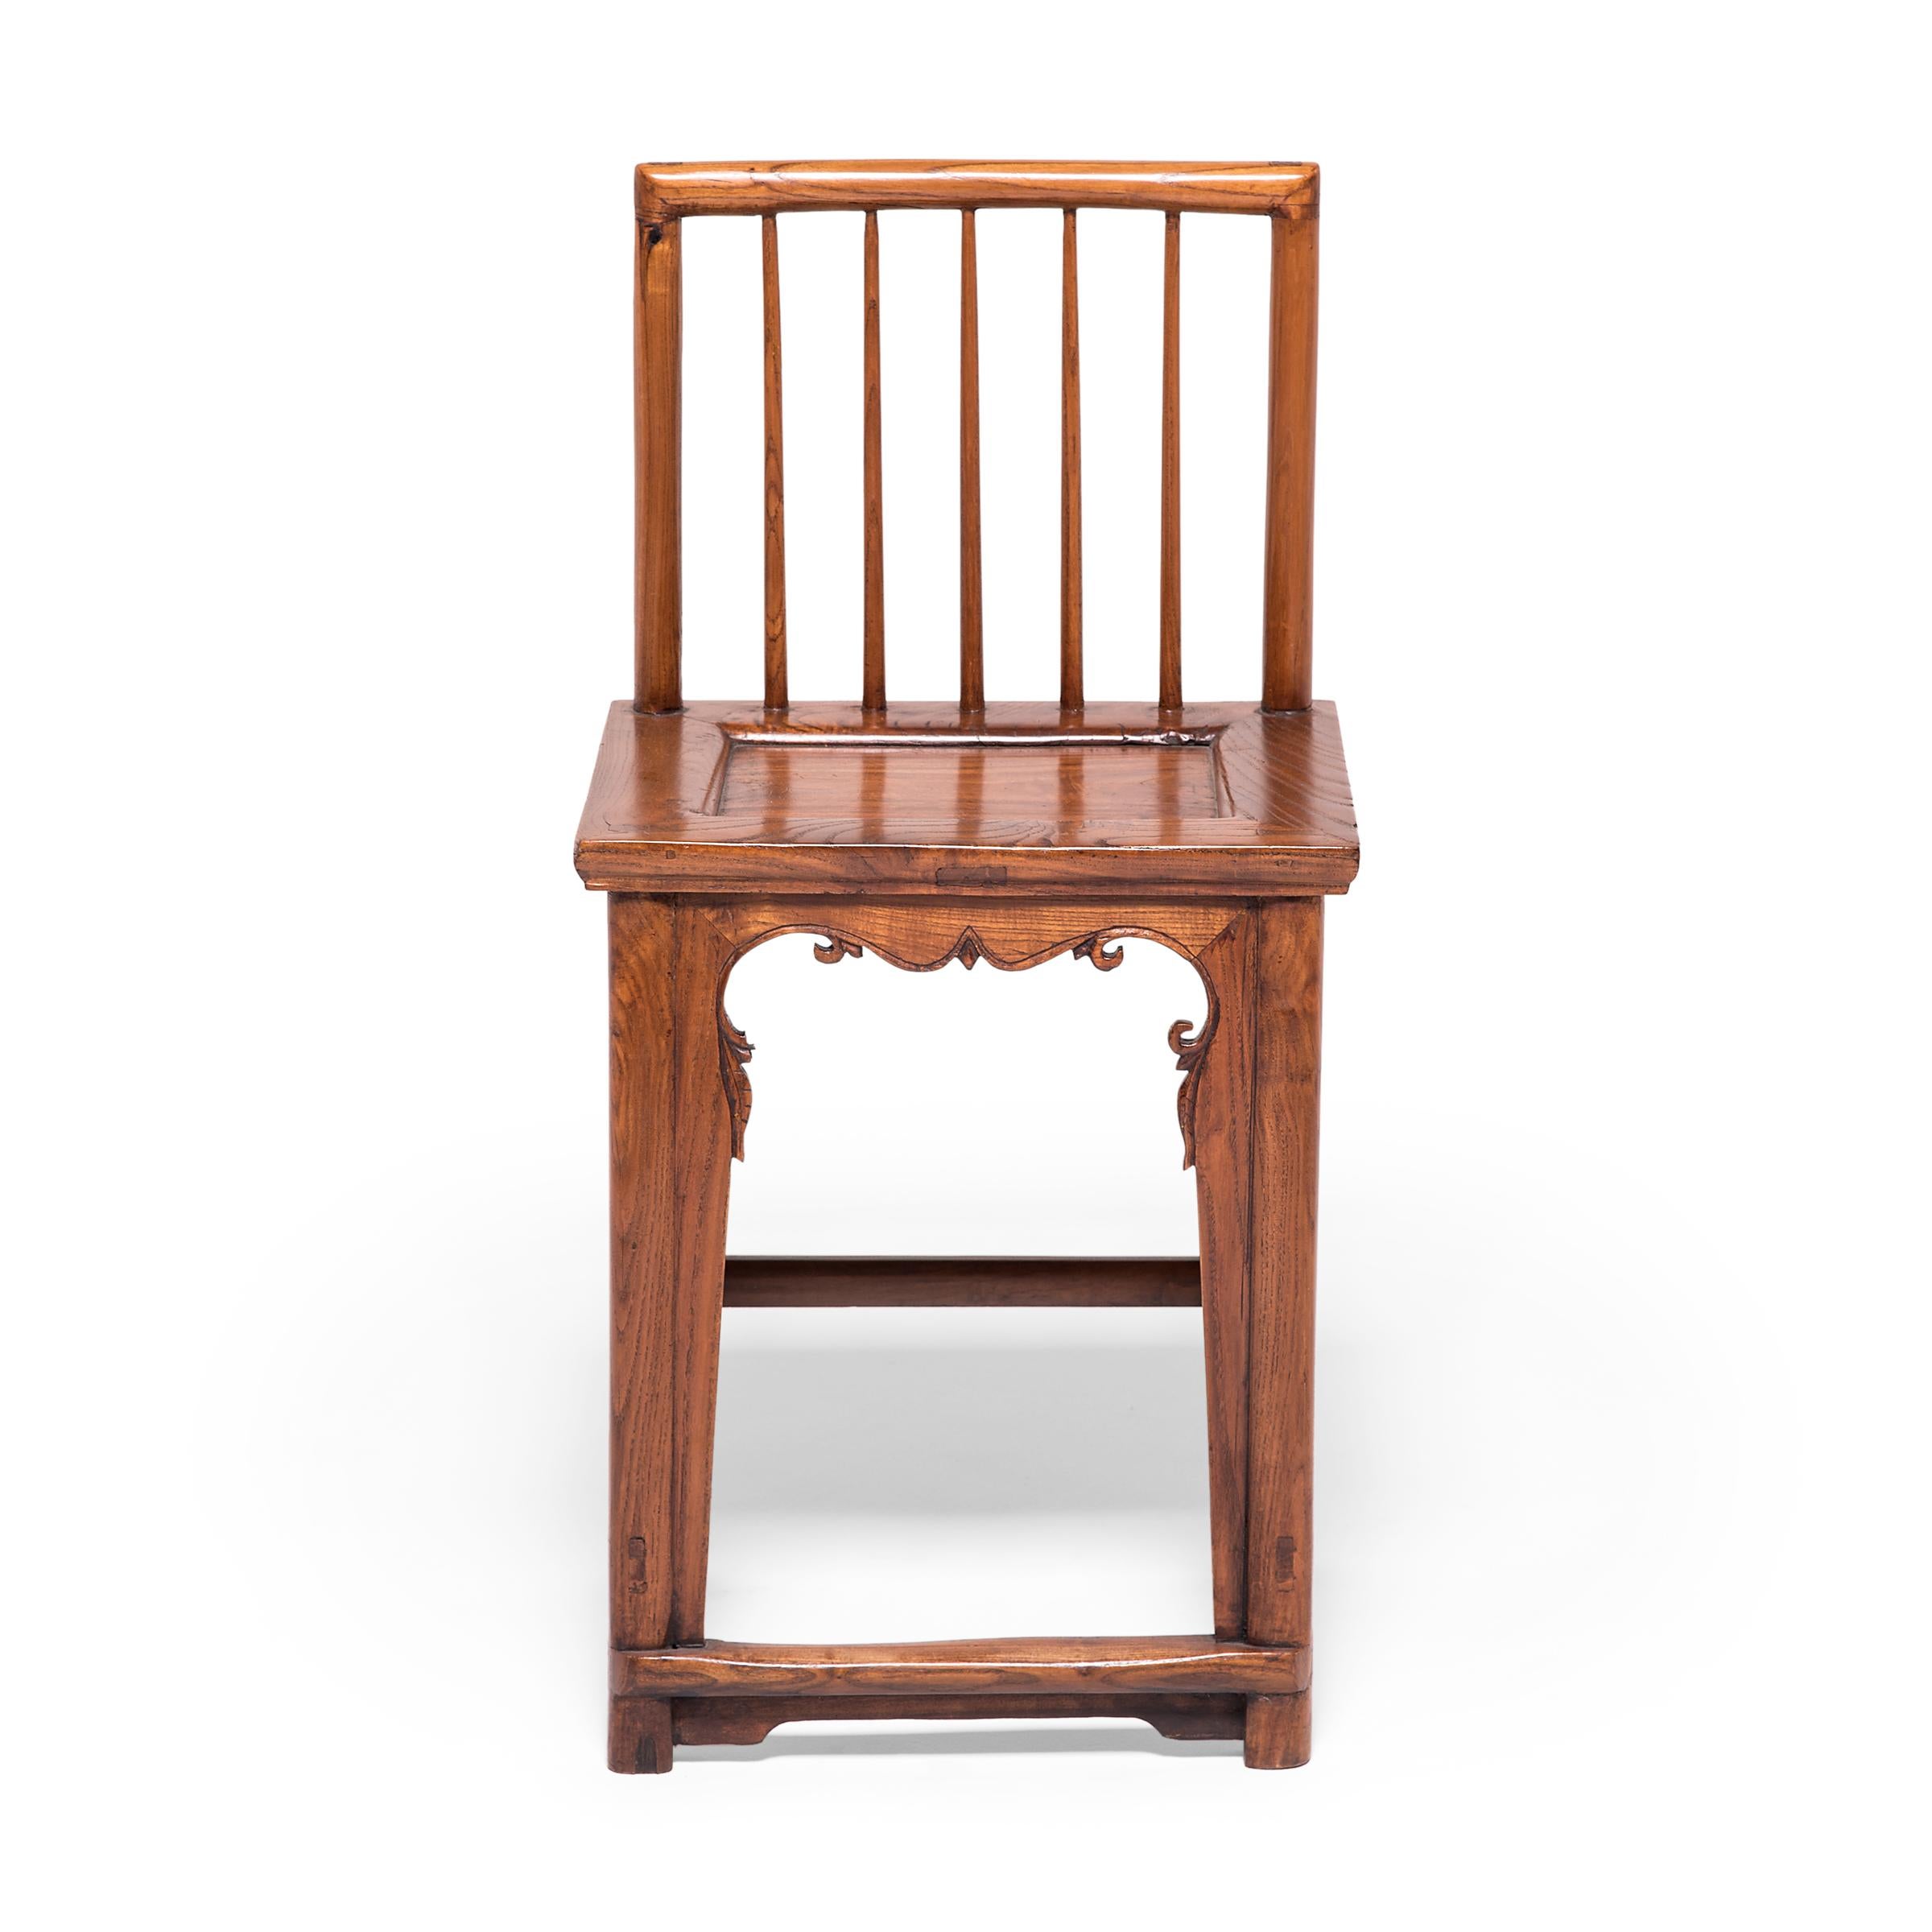 Pair of Chinese Walnut Spindleback Chairs, c. 1900 For Sale 3